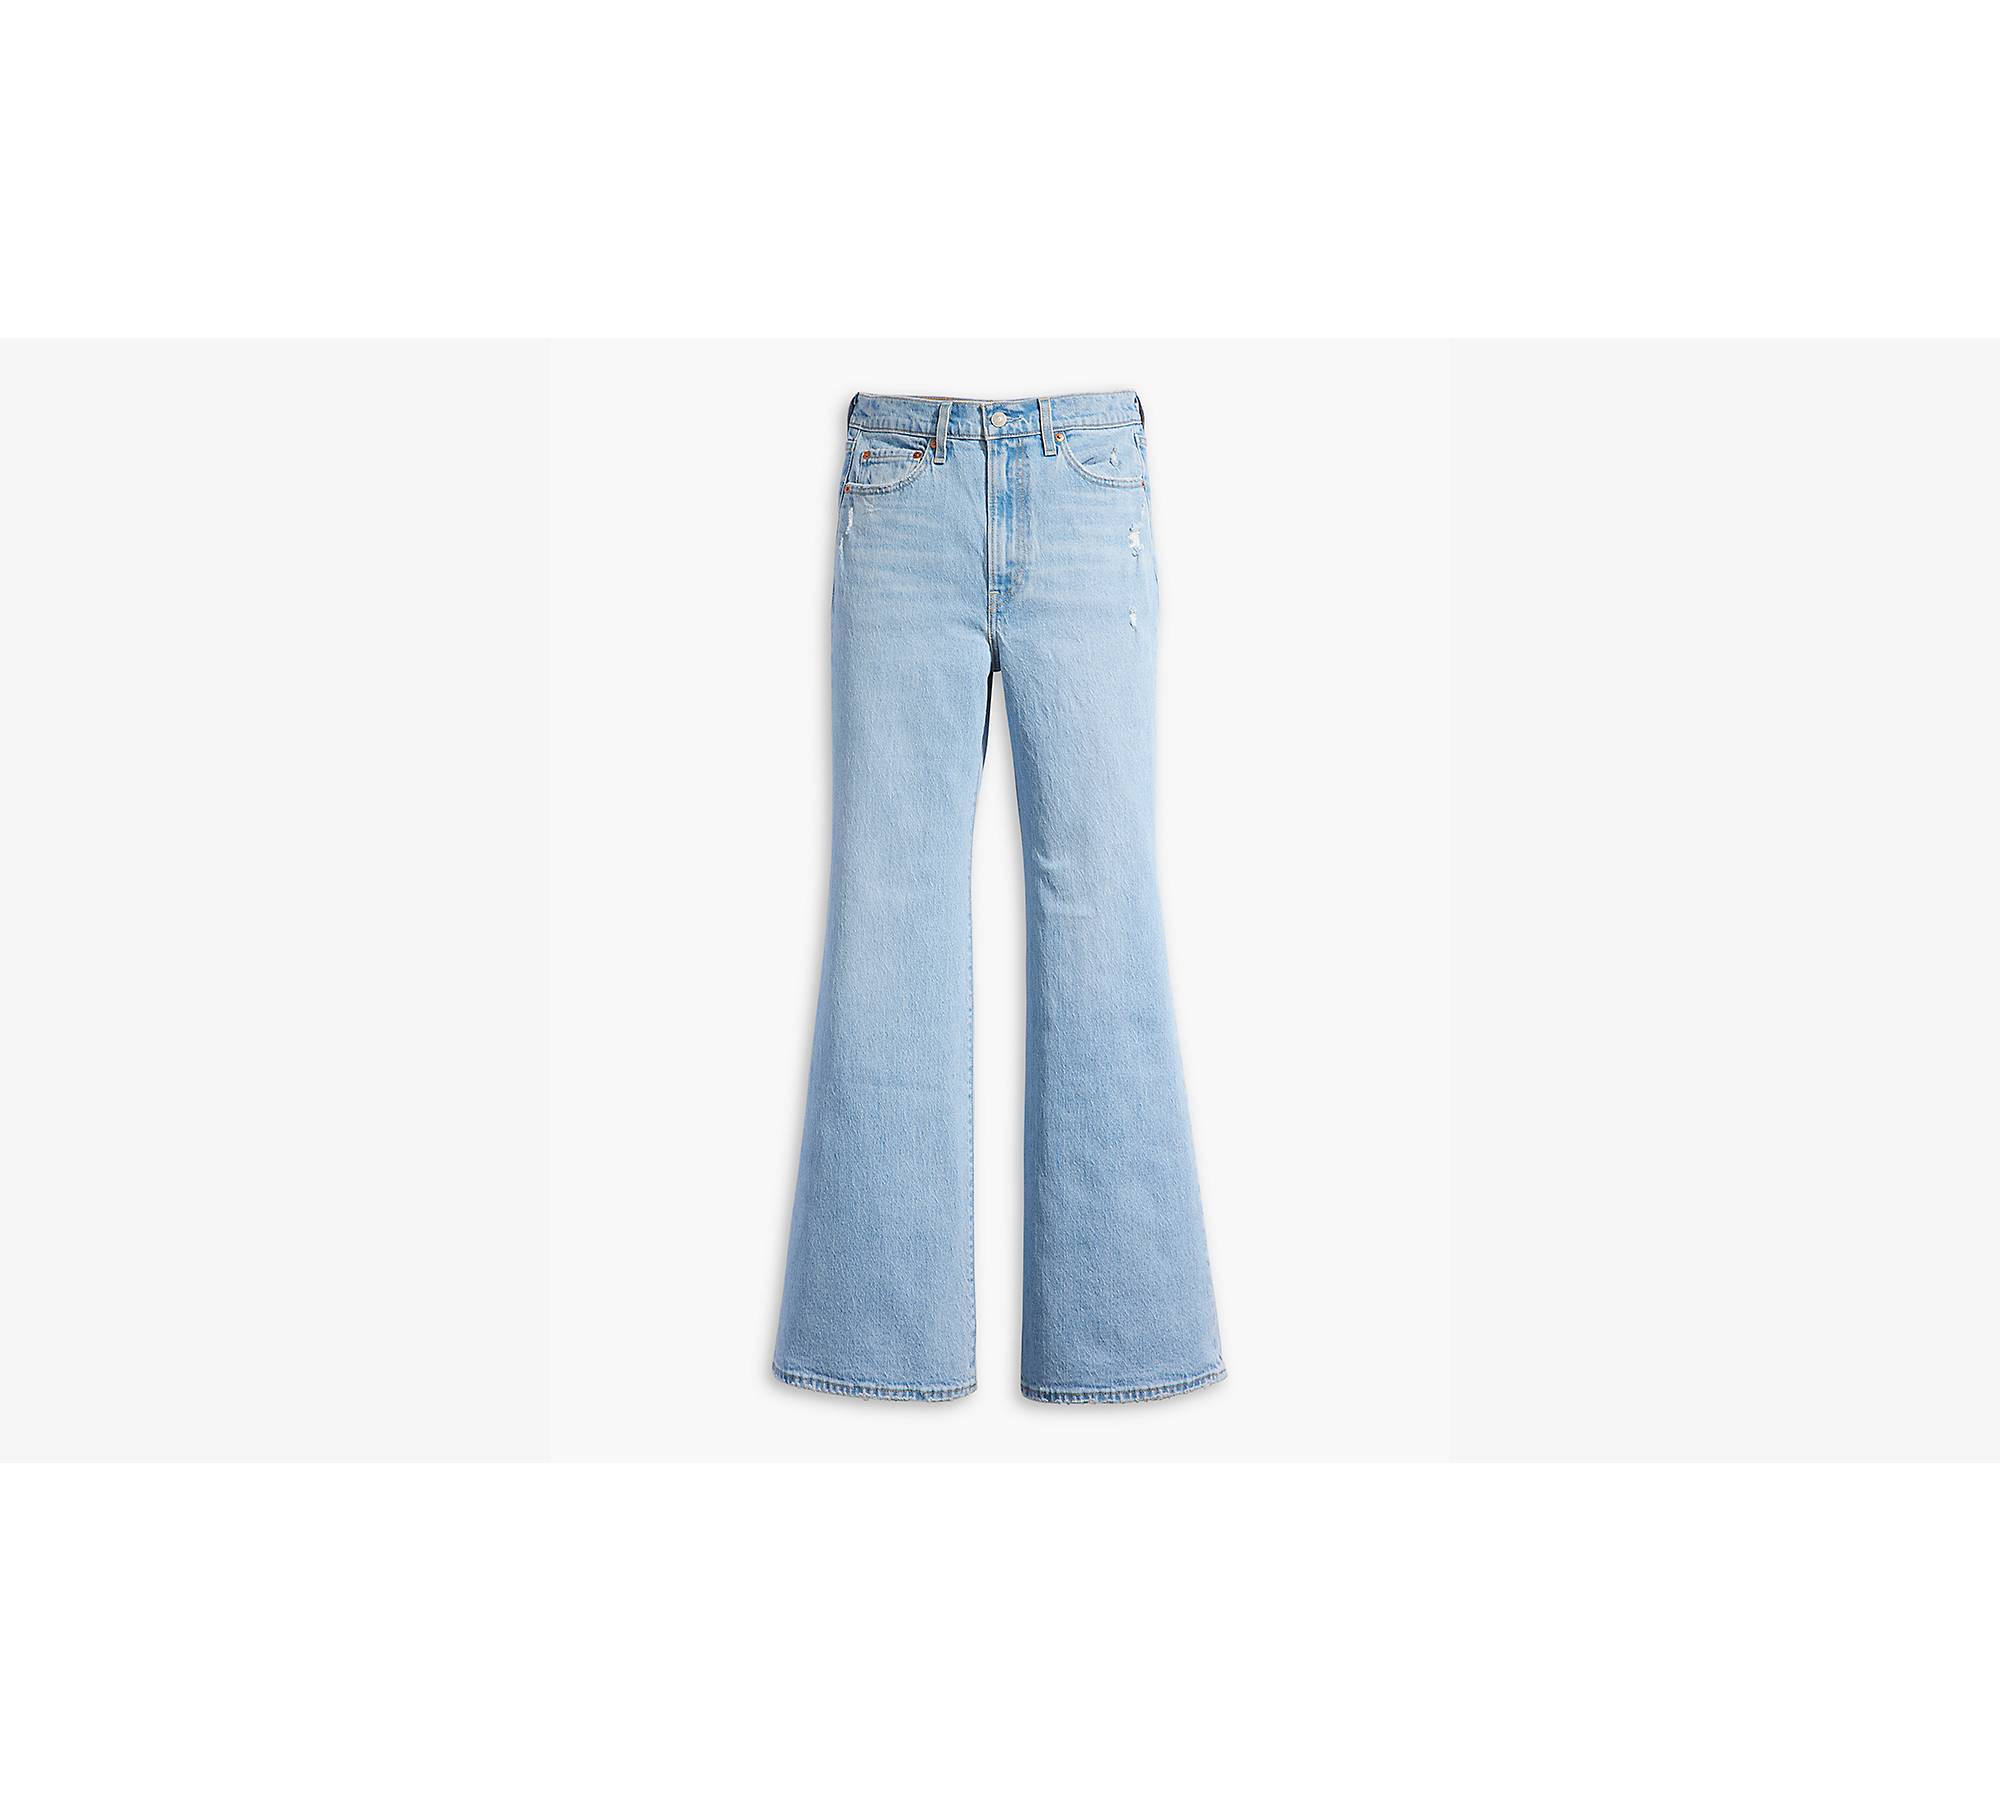 Ribcage Bell Jeans - Levi's Jeans, Jackets & Clothing